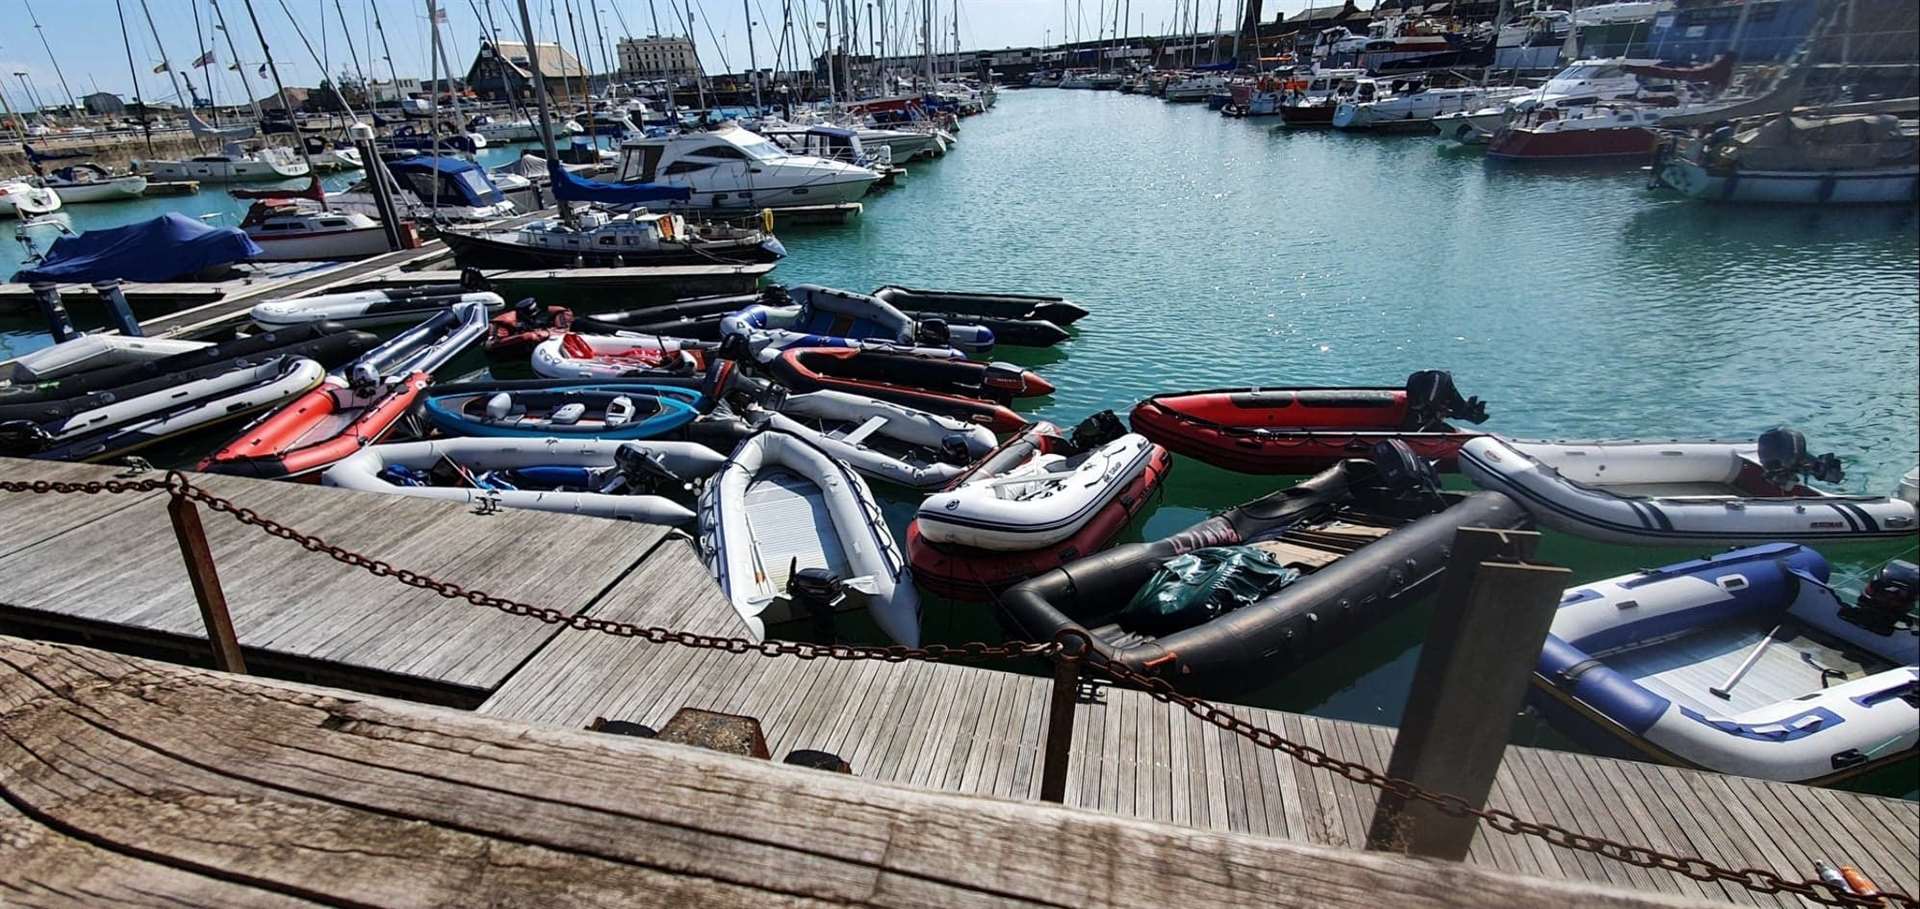 A stash of abandoned dinghies and canoes at Dover marina